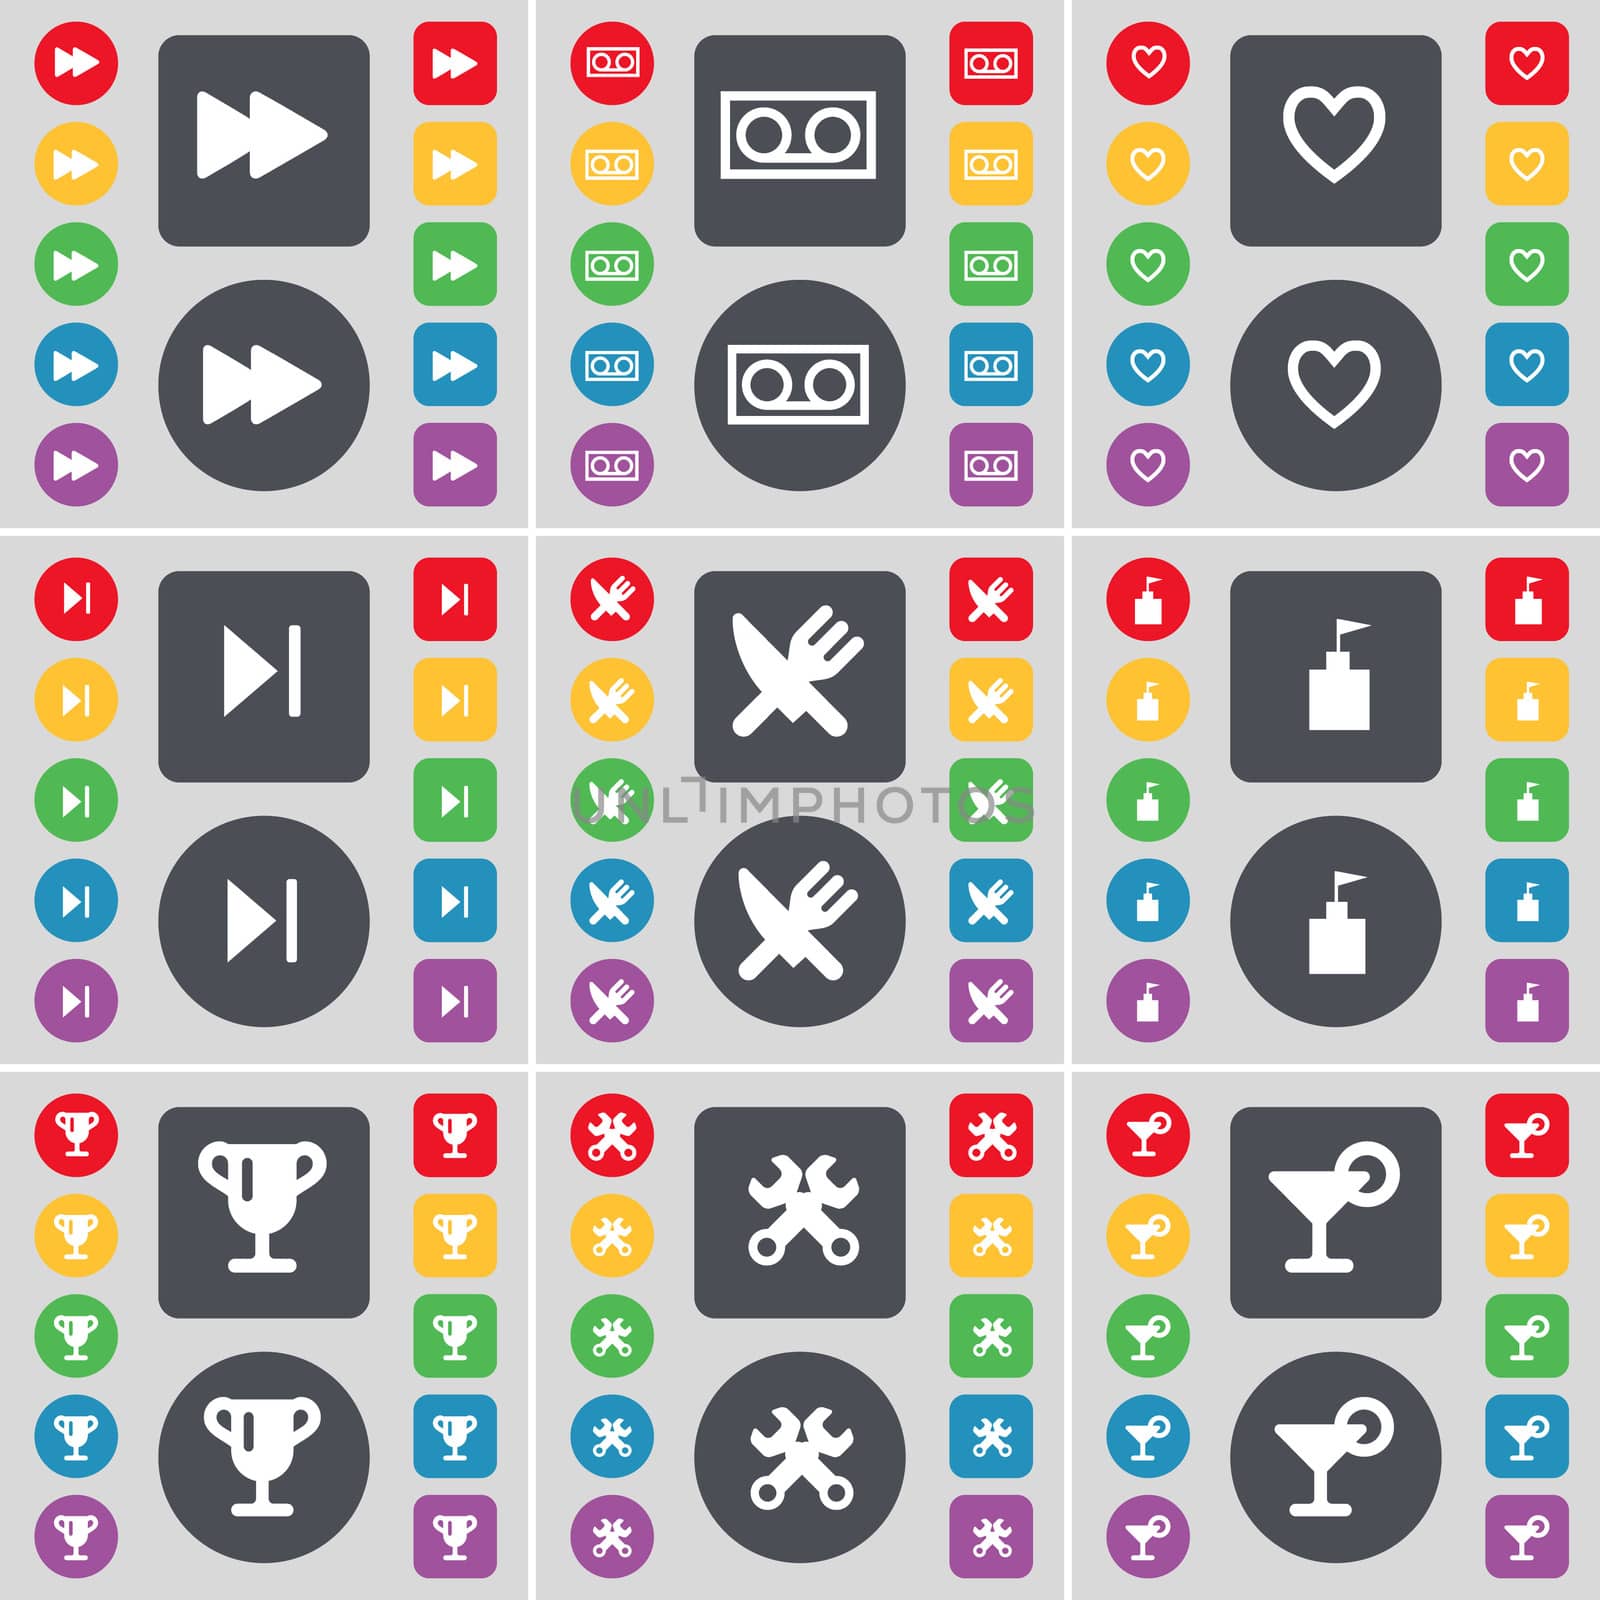 Rewind, Cassette, Heart, Media skip, Fork and knife, Flag tower, Cup, Wrench, Cocktail icon symbol. A large set of flat, colored buttons for your design.  by serhii_lohvyniuk